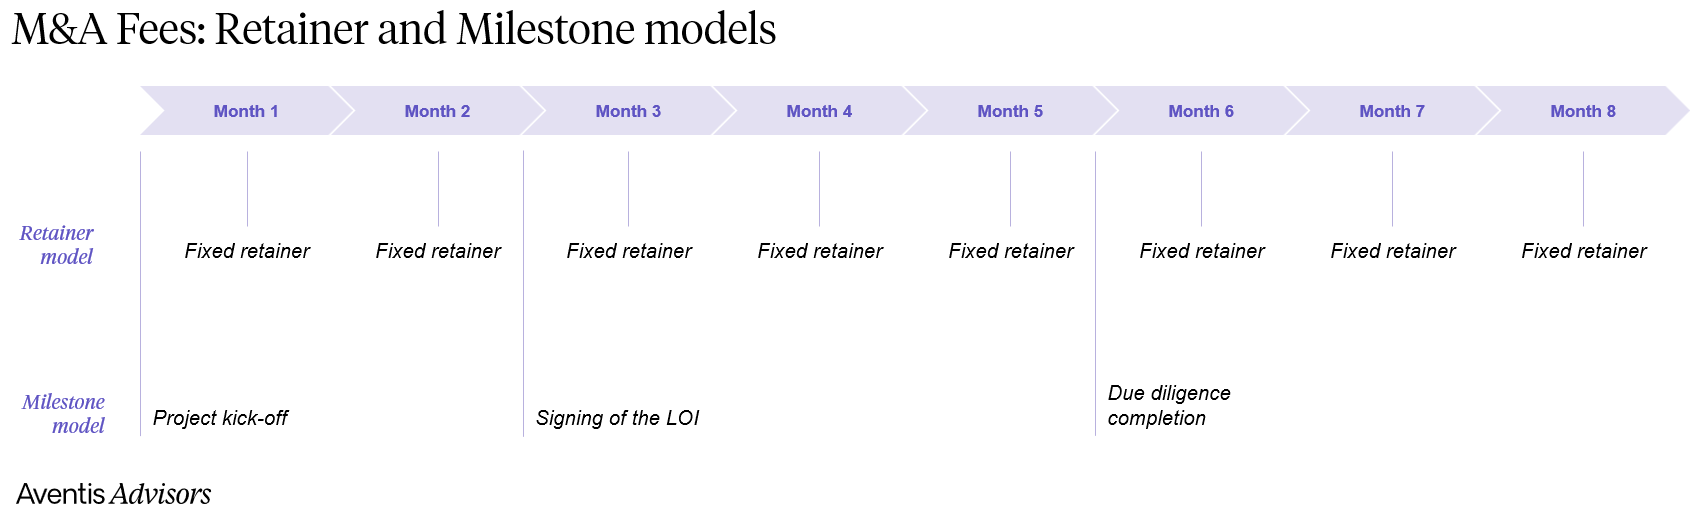 M&A Fees: Retainer and Milestone models